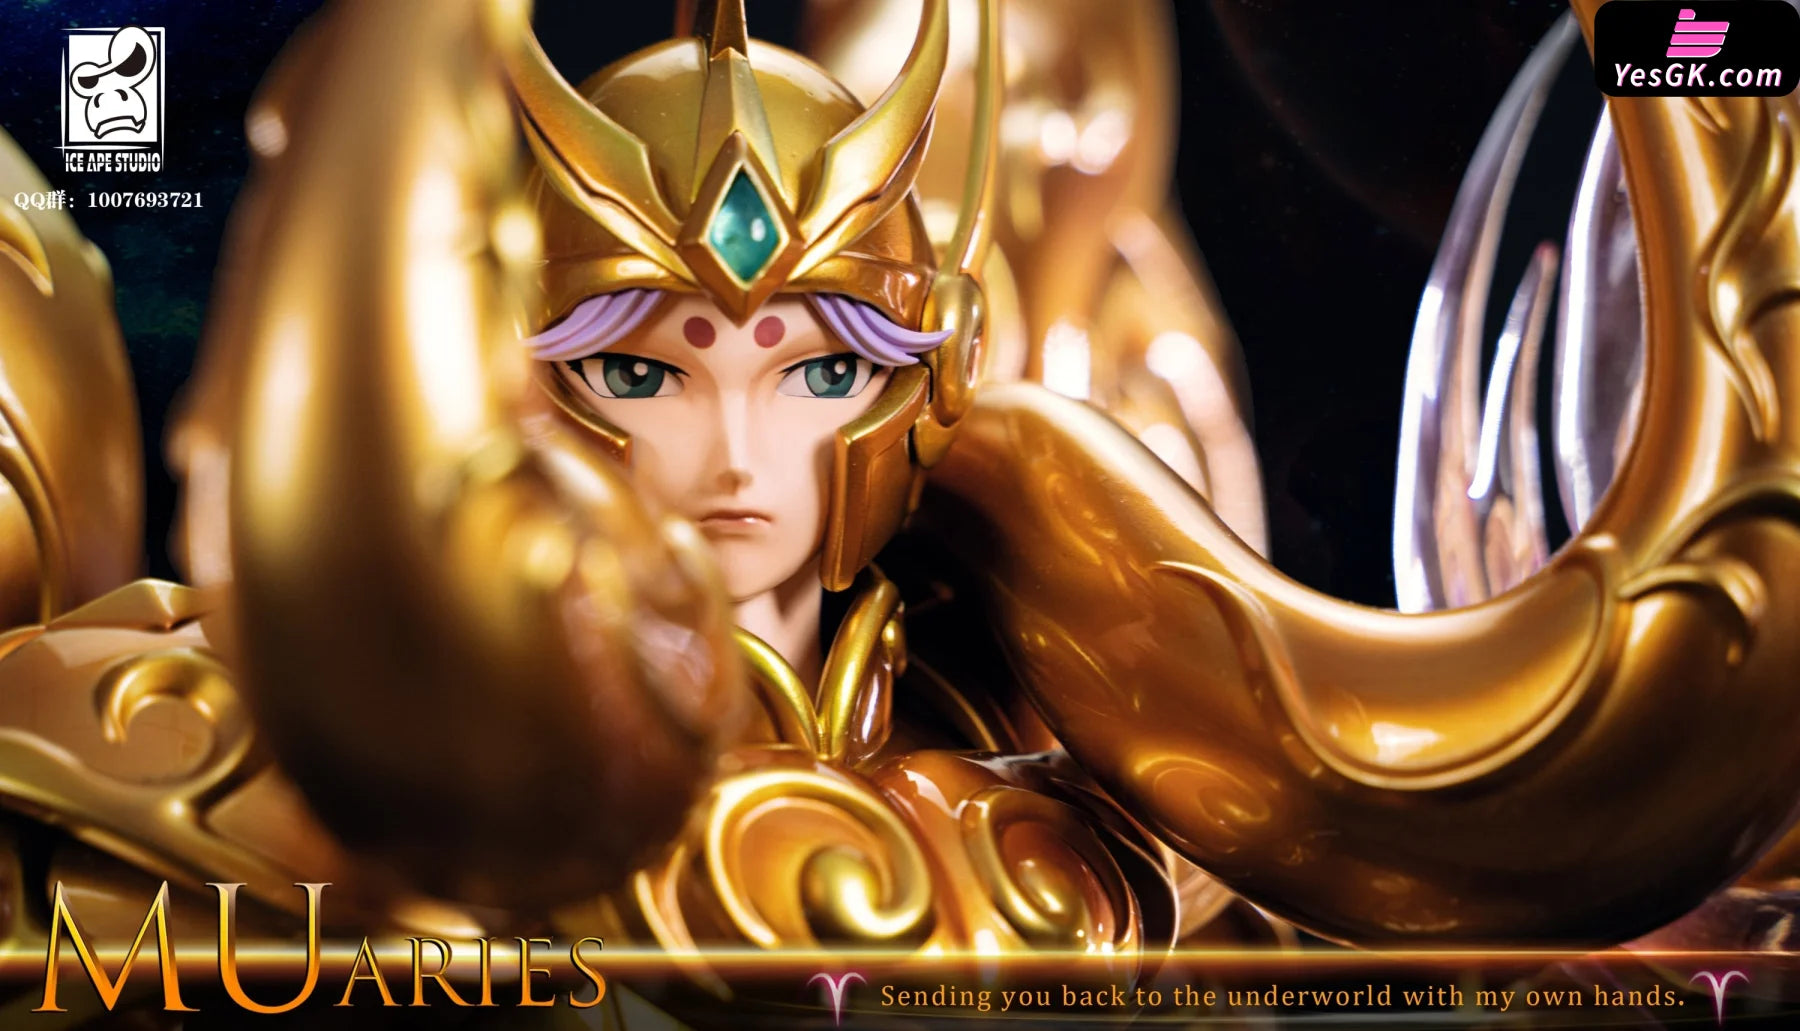 Saint Seiya: Soul of Gold Episode 2 Review: The Secret of